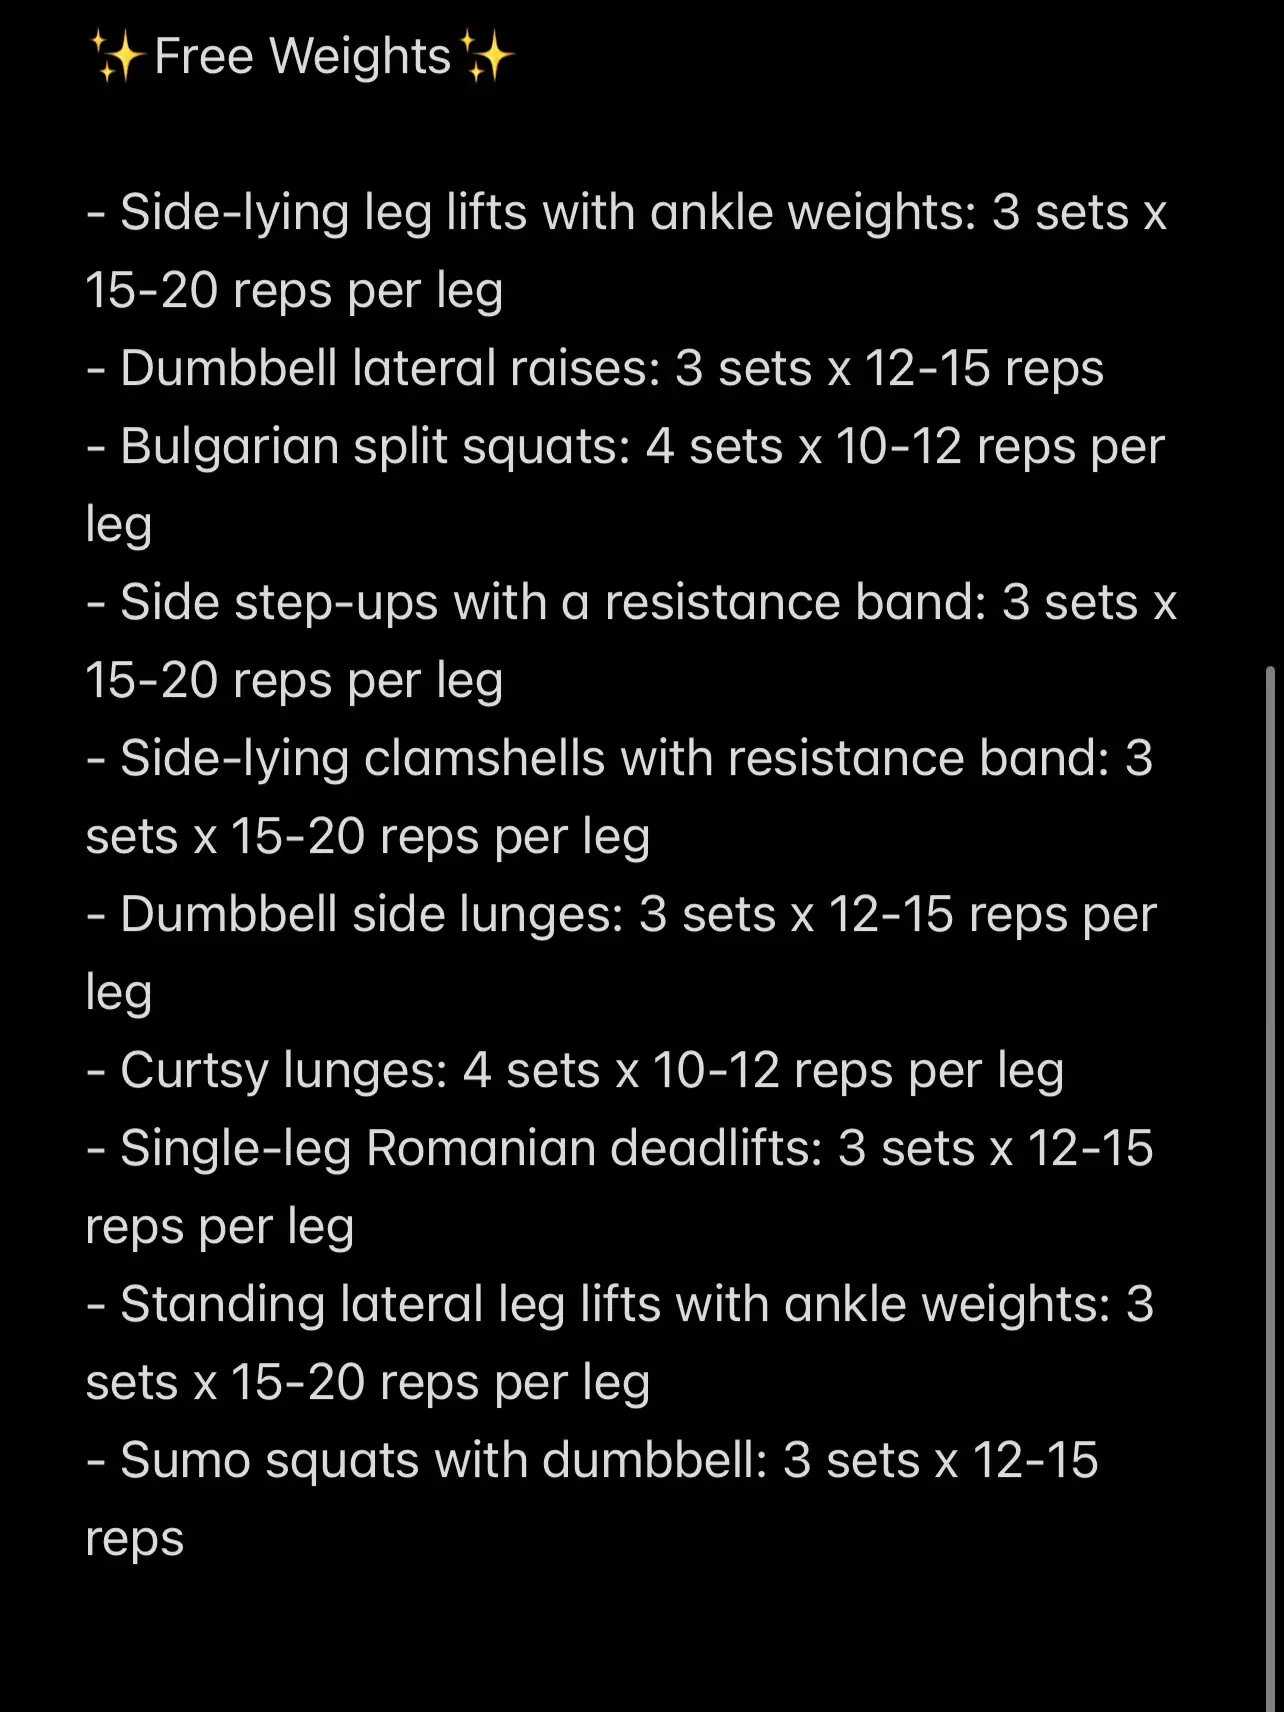 UPPER BODY ARMS WORKOUT 📌Save for later and tag a friend. THE WORKOUT:  Pick 3-4 exercises from the graphic. Do 10-15 reps. Do 3-4 sets of each